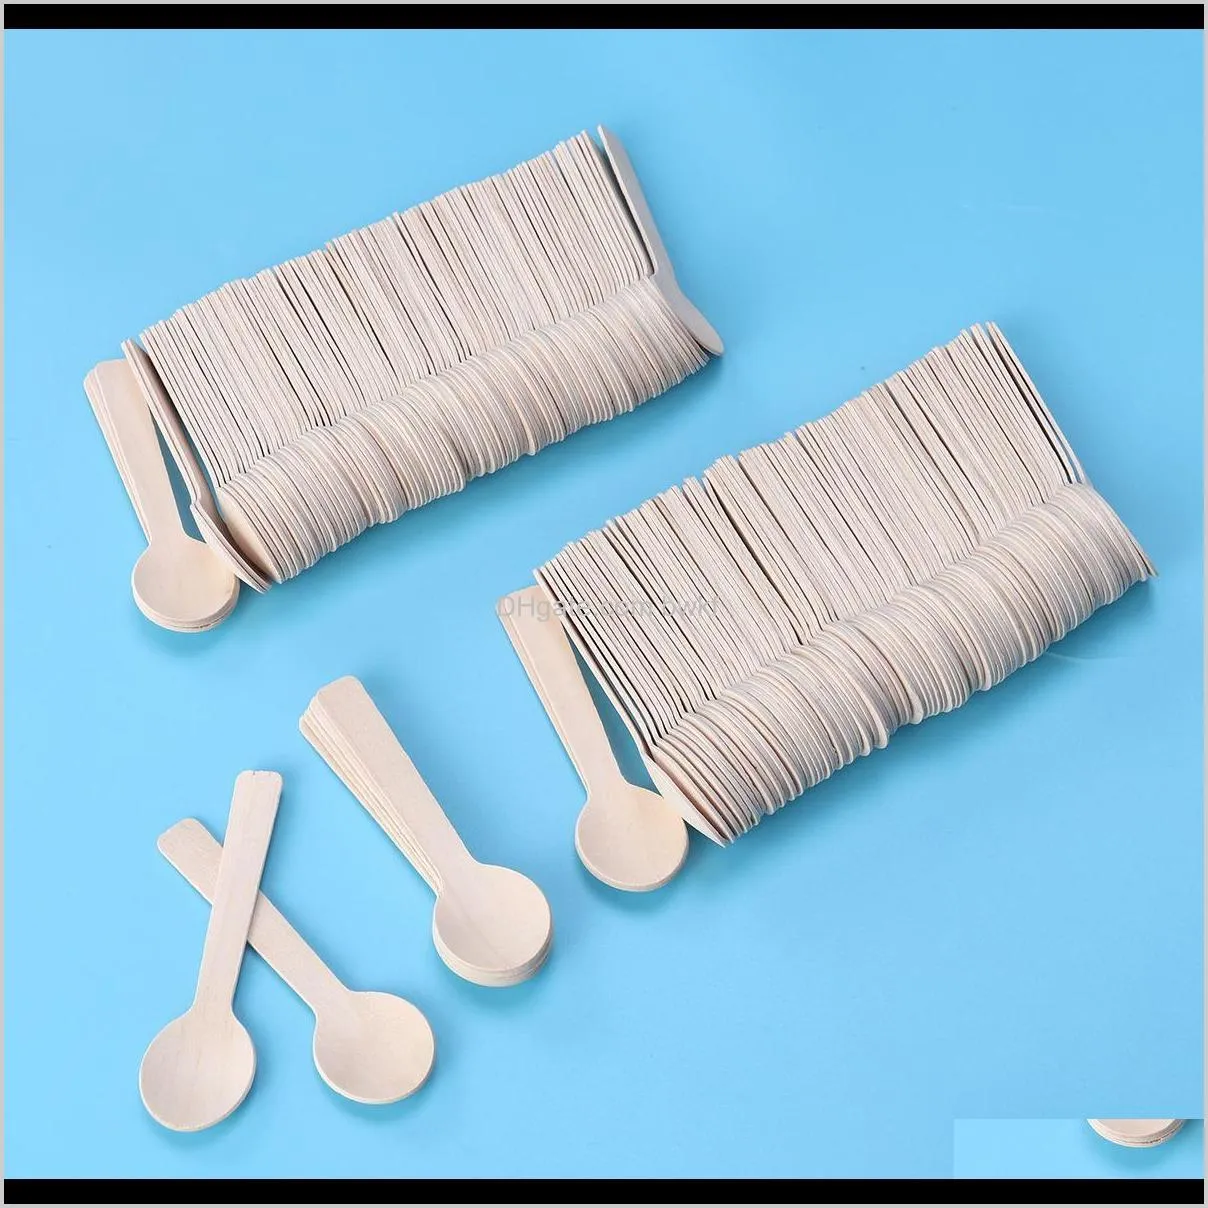 fashin 200pcs disposable wood tableware dinnerware premium safe spoons cutlery tableware for outdoor picnic hiking party